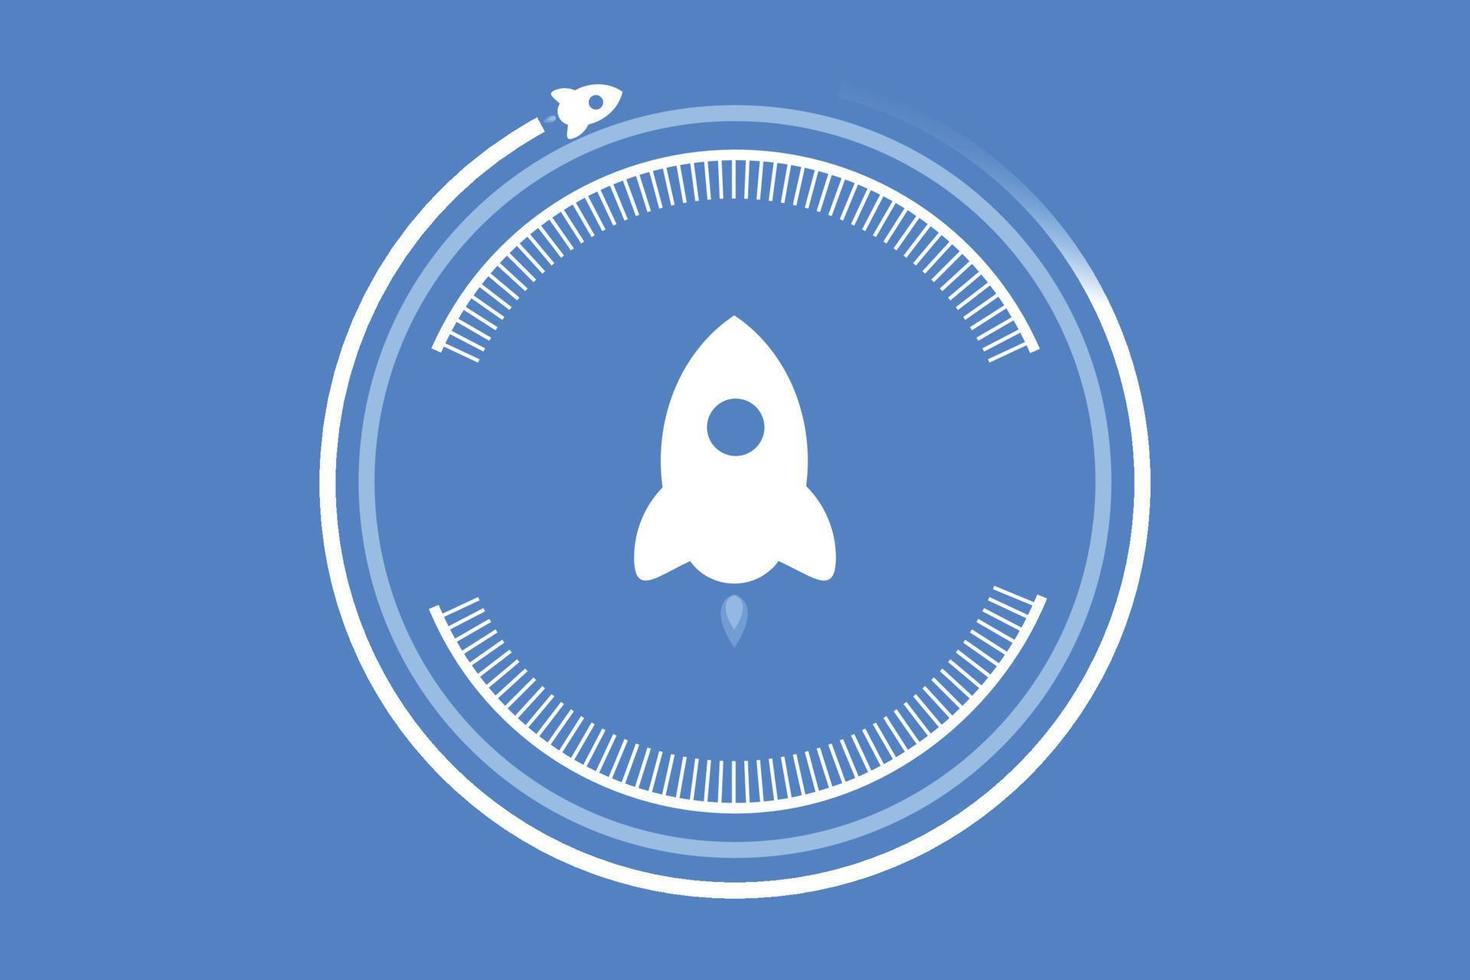 Lovely space rocket with a flat design, vector